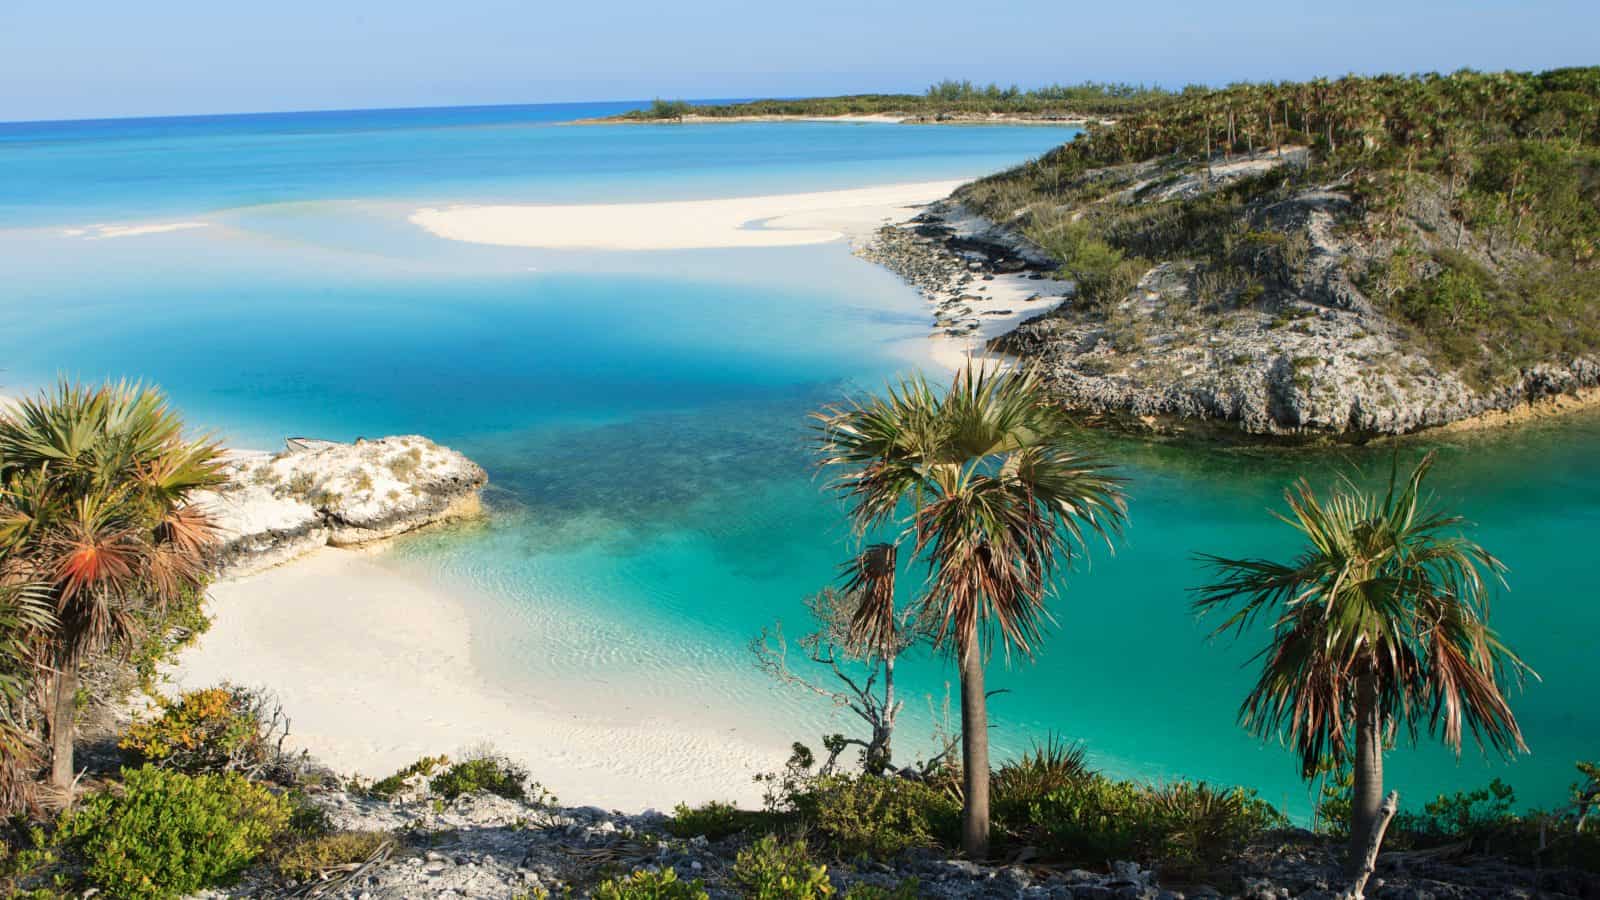 The beaches and incredible blue waters of the Bahamas.